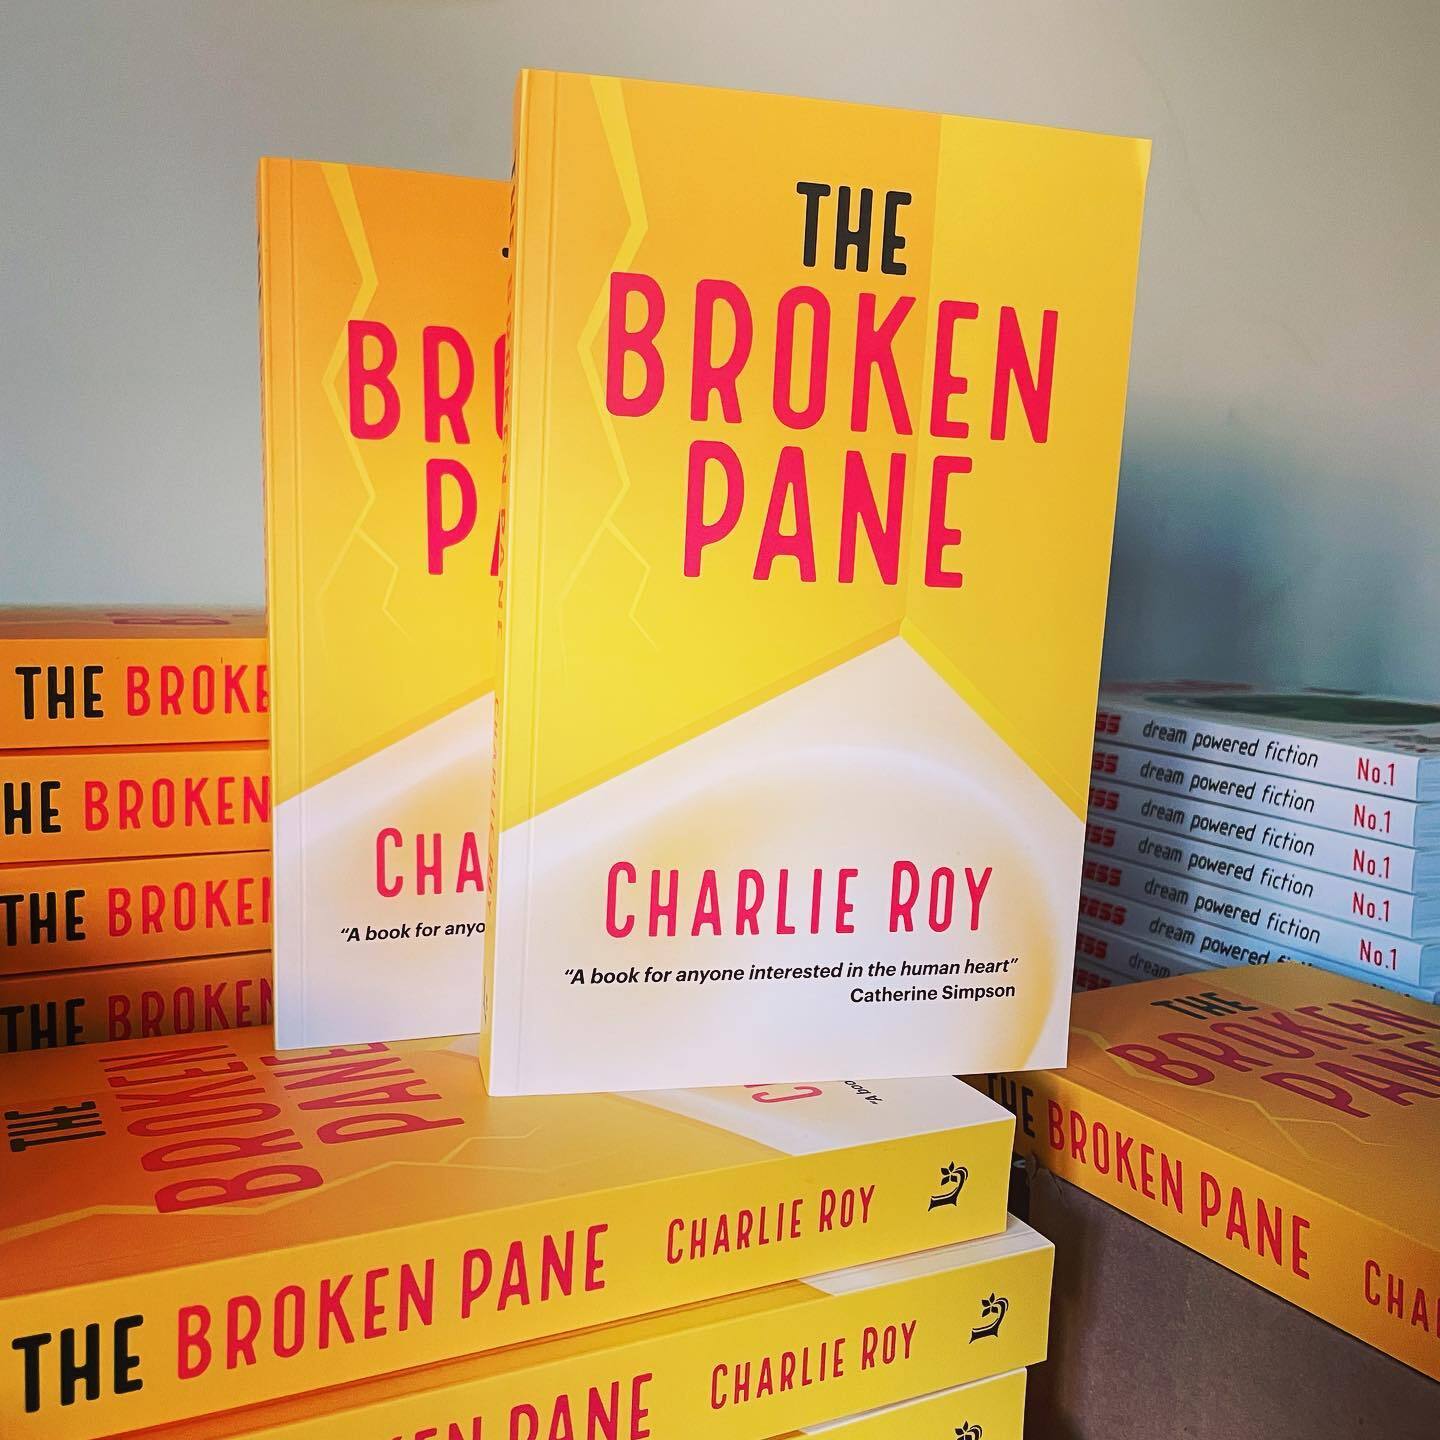 The Broken Pane by Charlie Roy